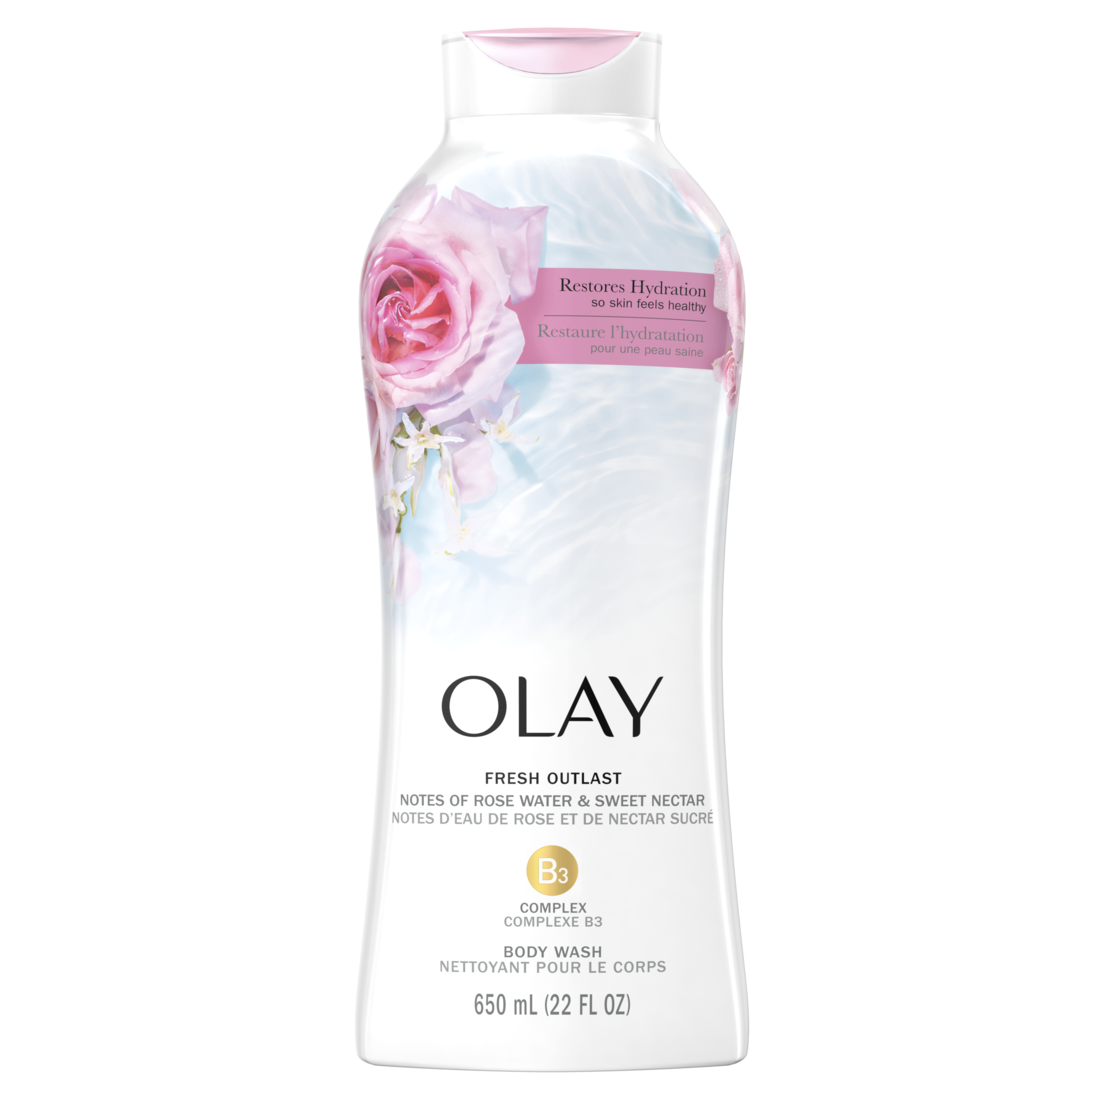 Olay Fresh Outlast Body Wash Notes of Rose Water & Sweet Nectar - 22oz/4pk